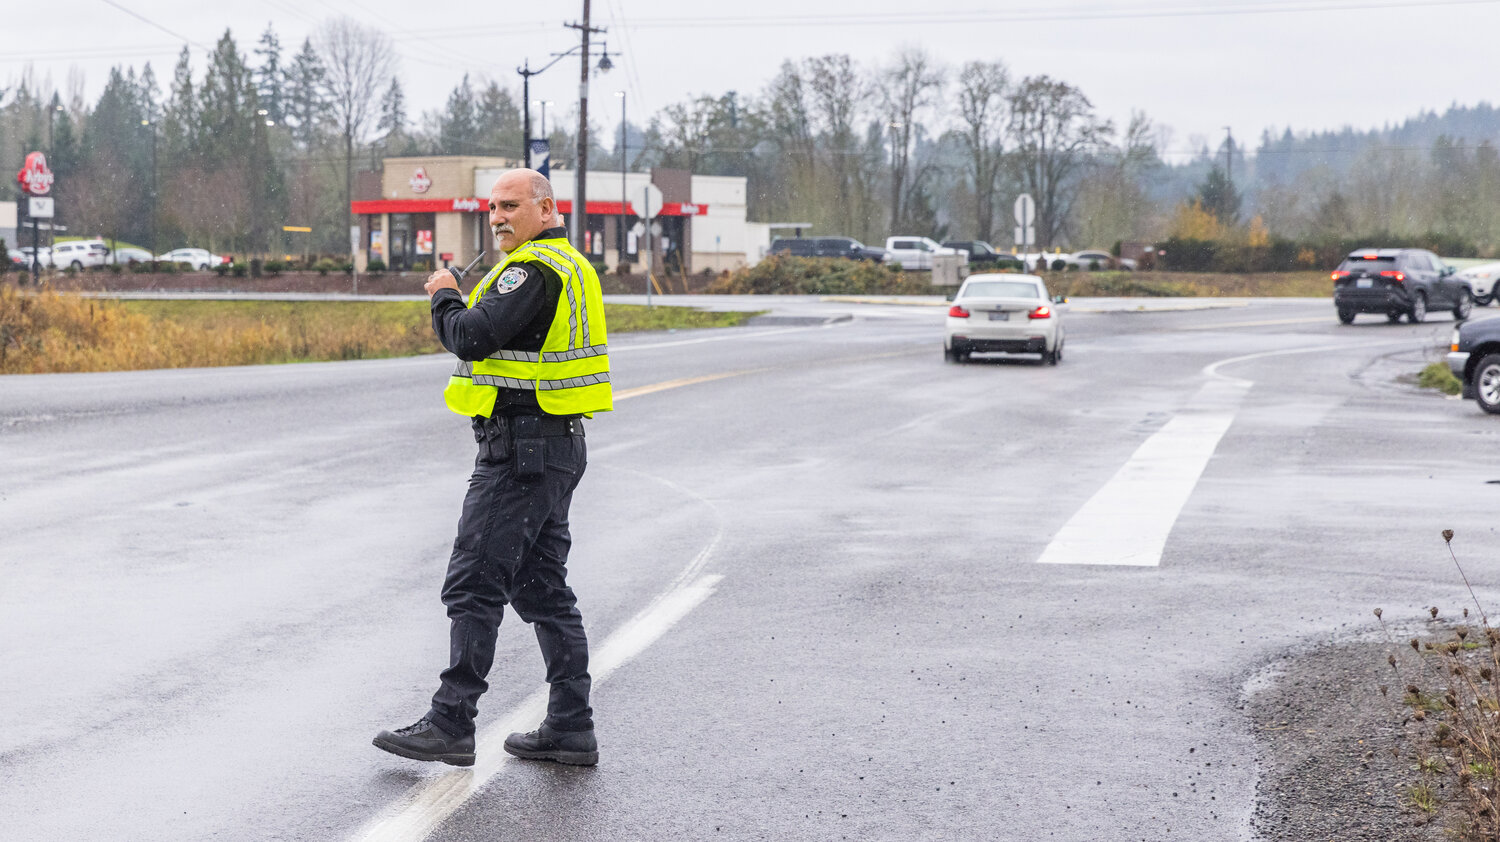 Napavine Chief of Police John Brockmueller directs traffic along West Forest Napavine Road on Wednesday, Dec. 6, after the truck struck the cement under the bridge for Interstate 5 and became lodged between supports.